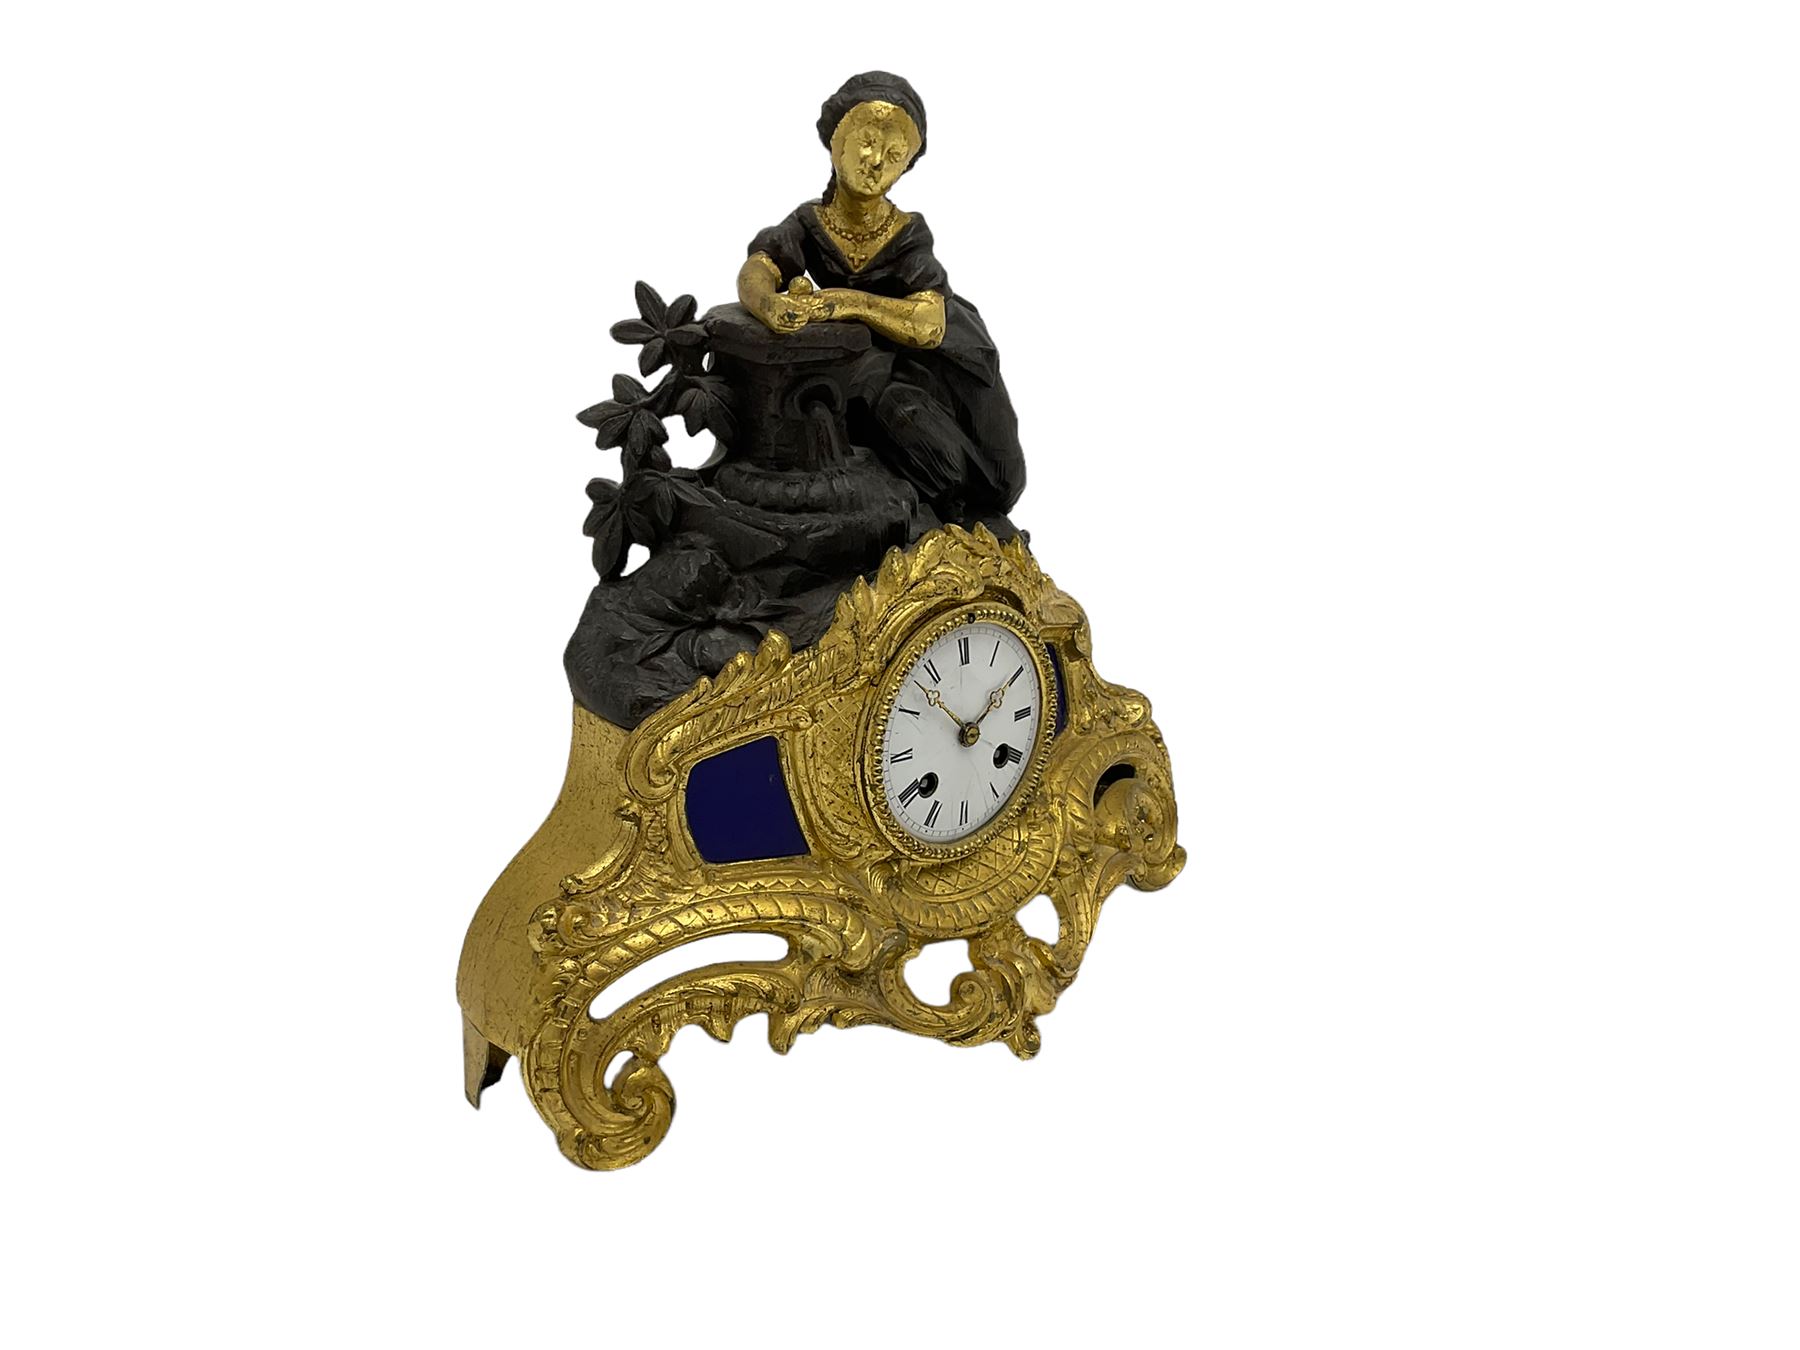 Early 19th century c 1820 French mantle clock in a spelter and gilt case - Image 2 of 3